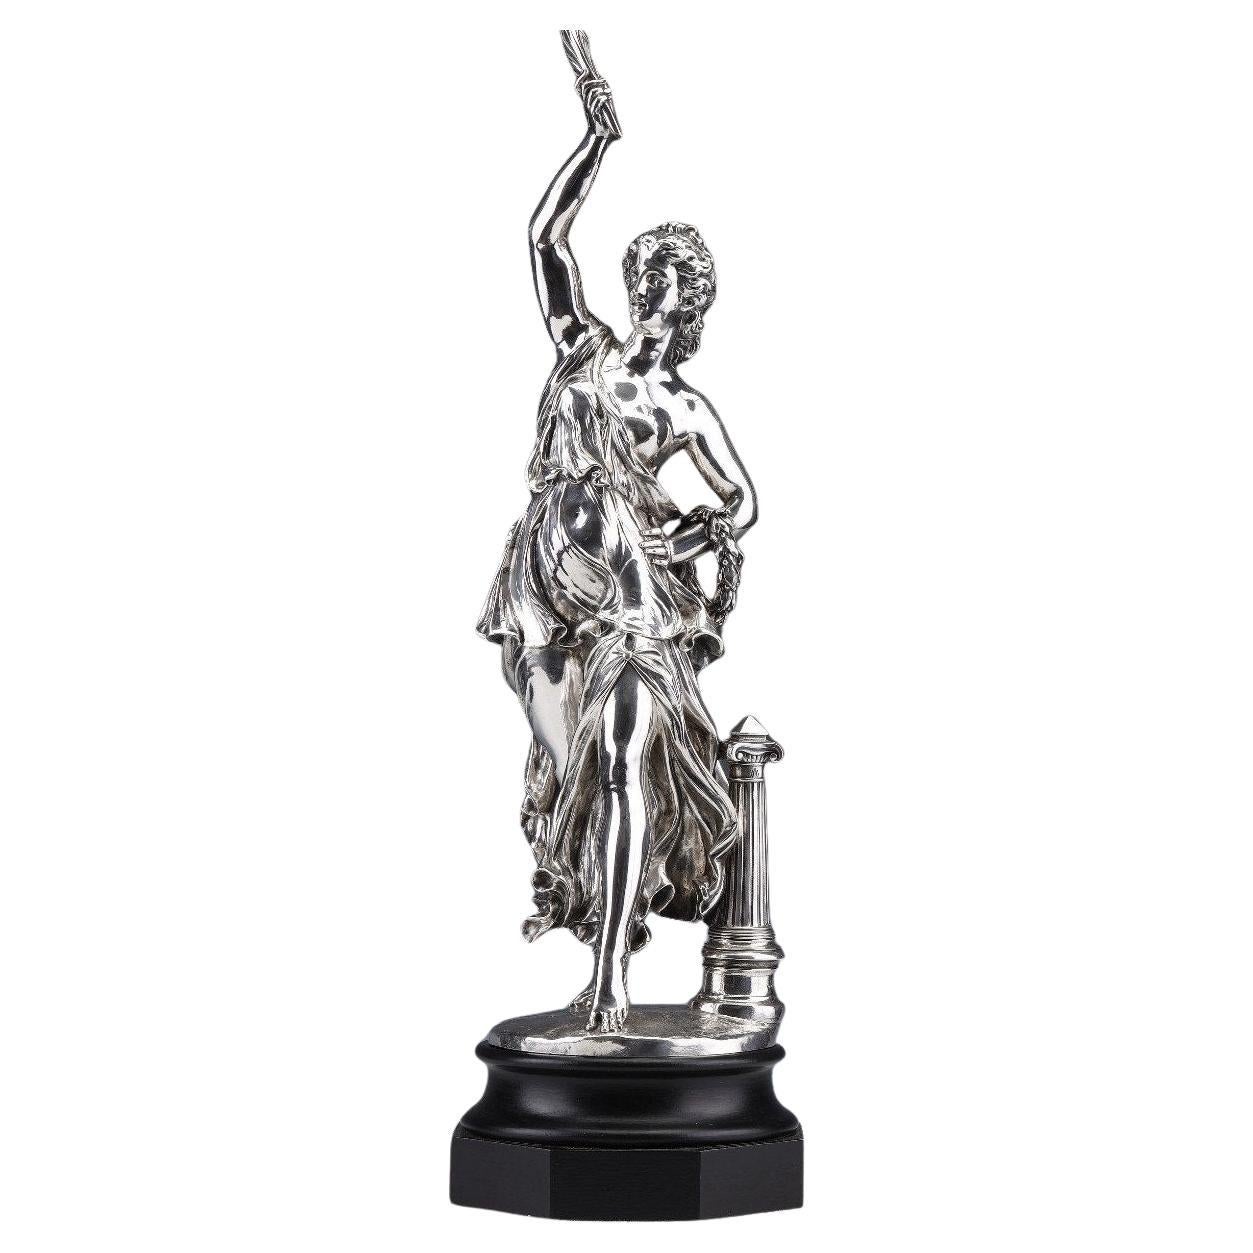  Jacques Léonard Maillet - Allegorical Statue In Solid Silver - 19th Century For Sale